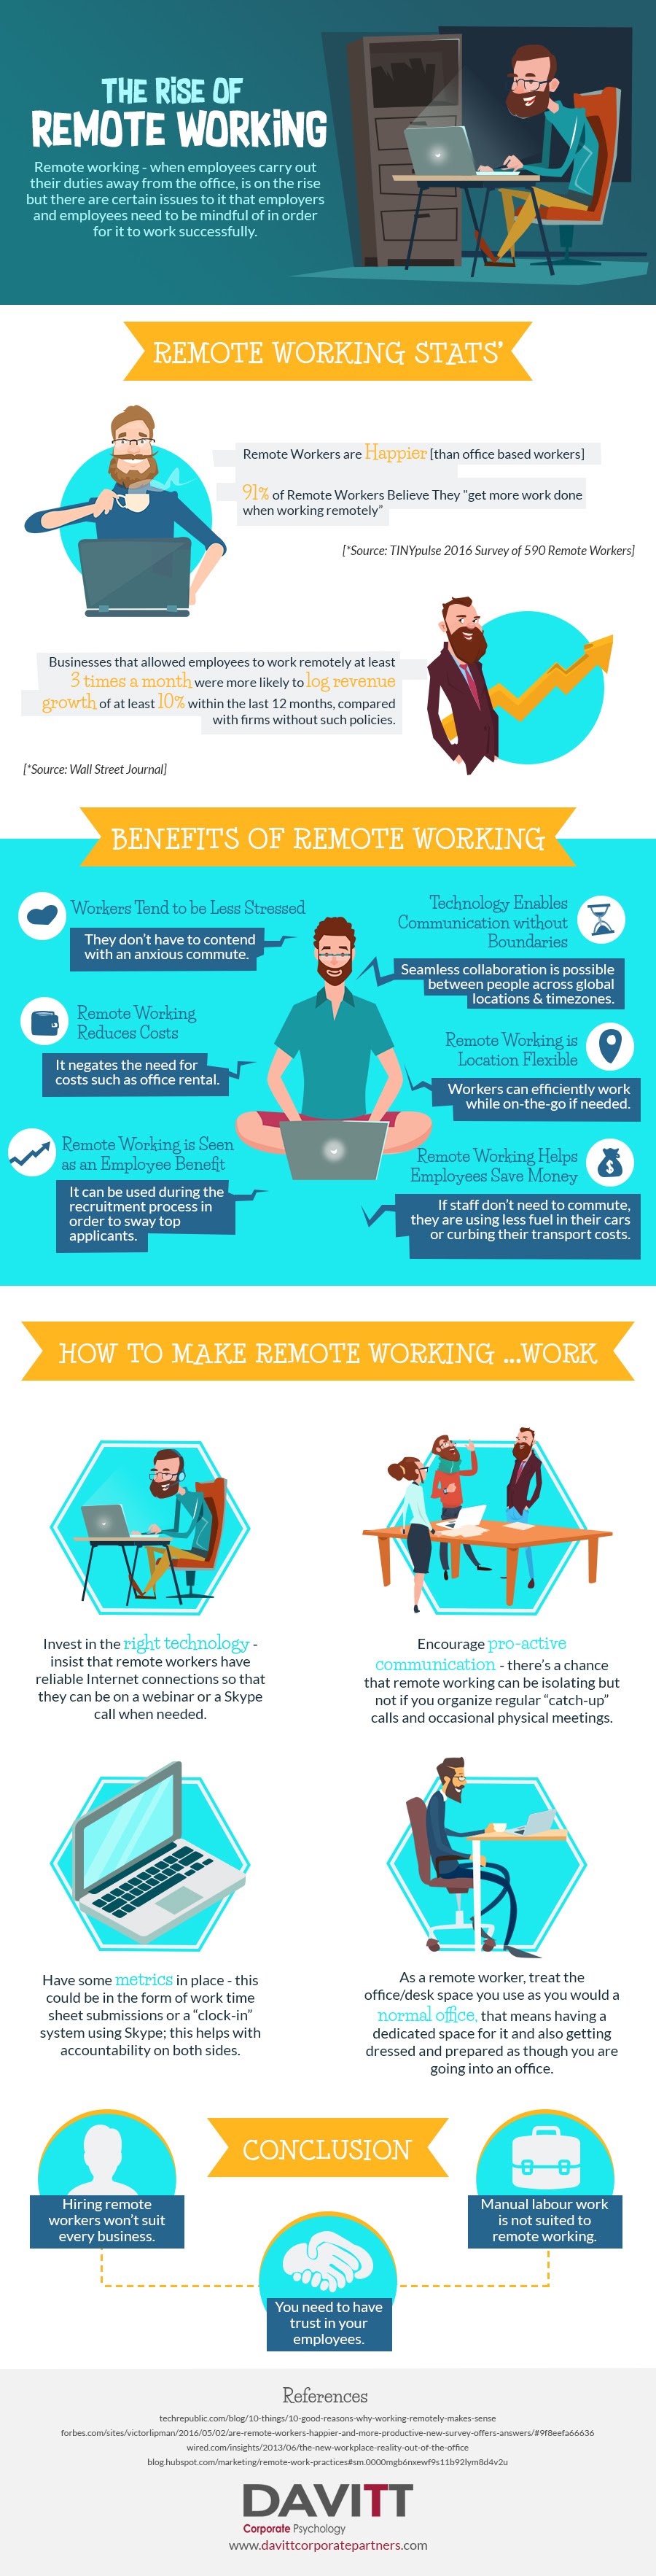 The Rise of Remote Working #Infographic